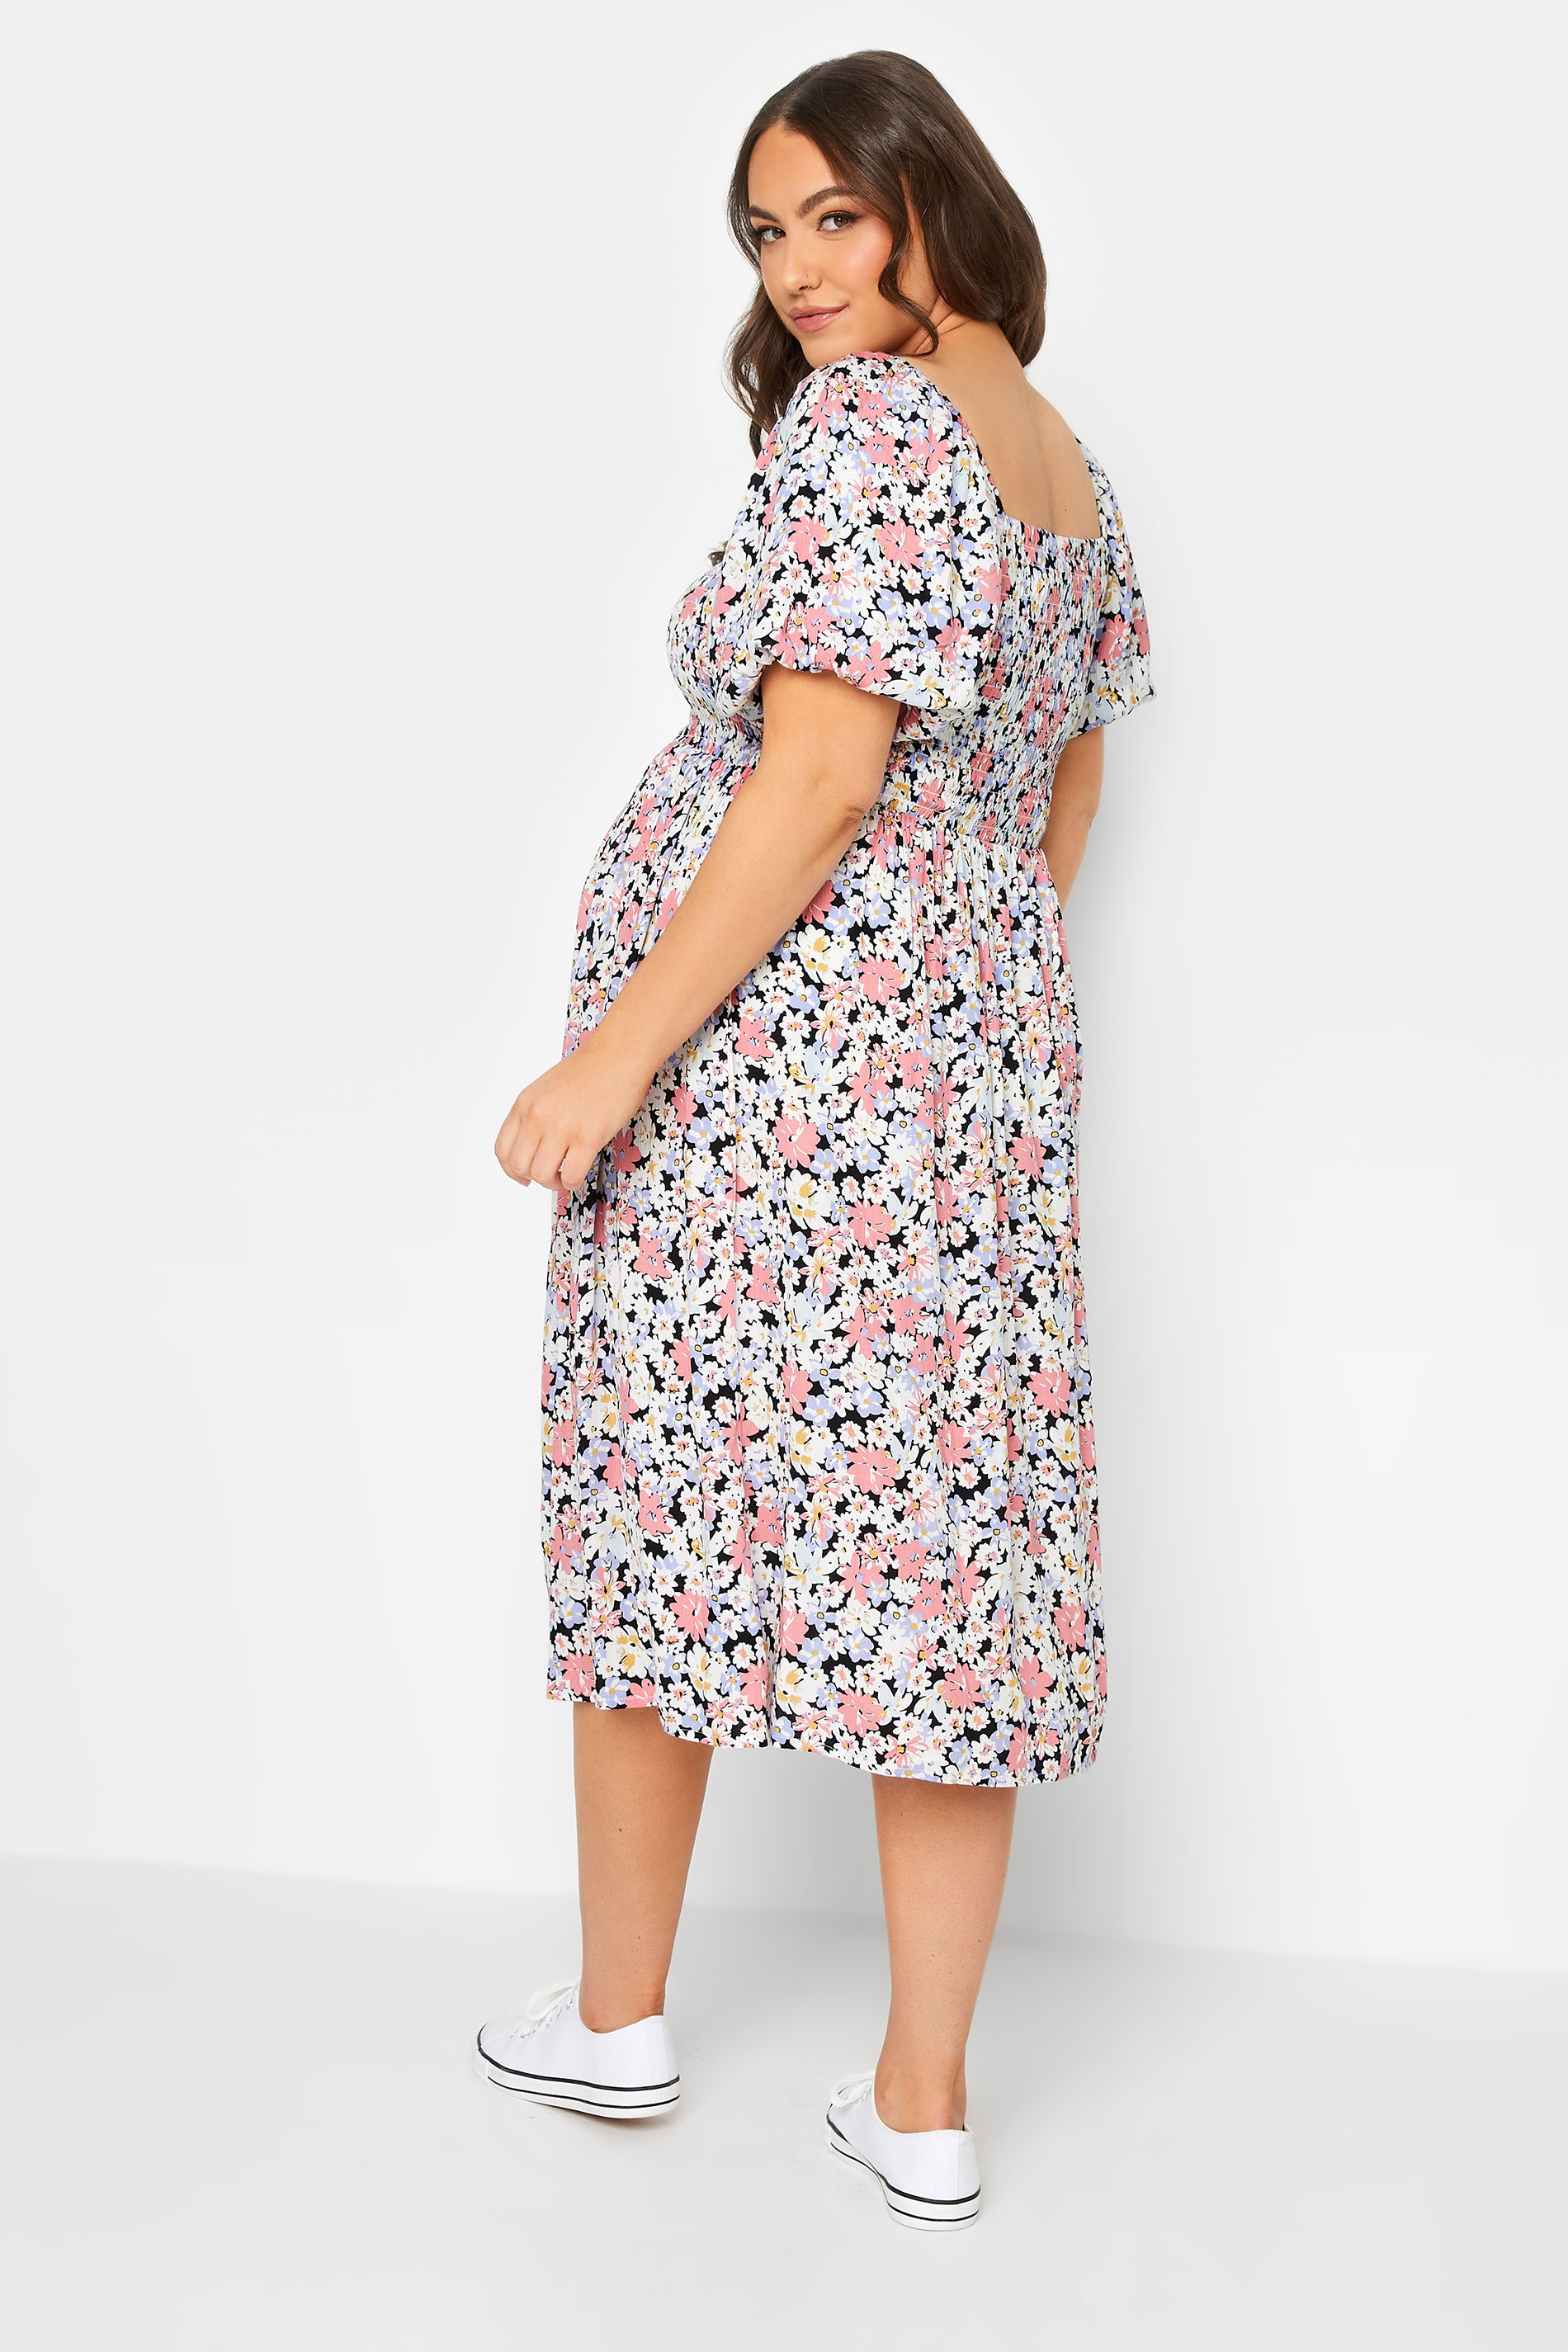 BUMP IT UP MATERNITY Curve Plus Size Pink Floral Shirred Dress | Yours Clothing  3